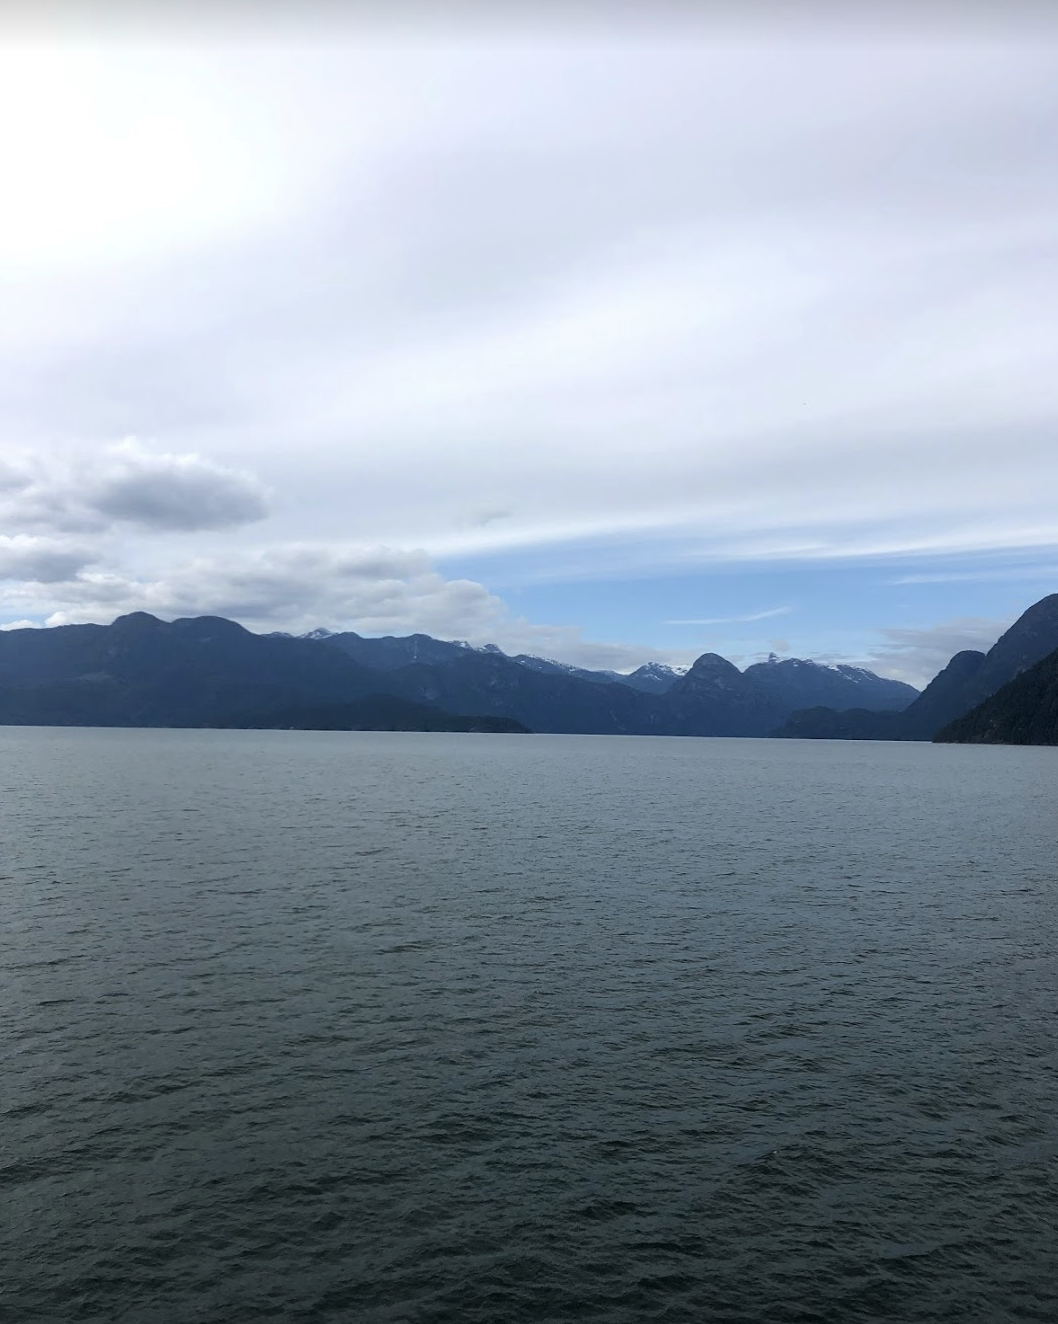 View from the Sunshine Coast ferry